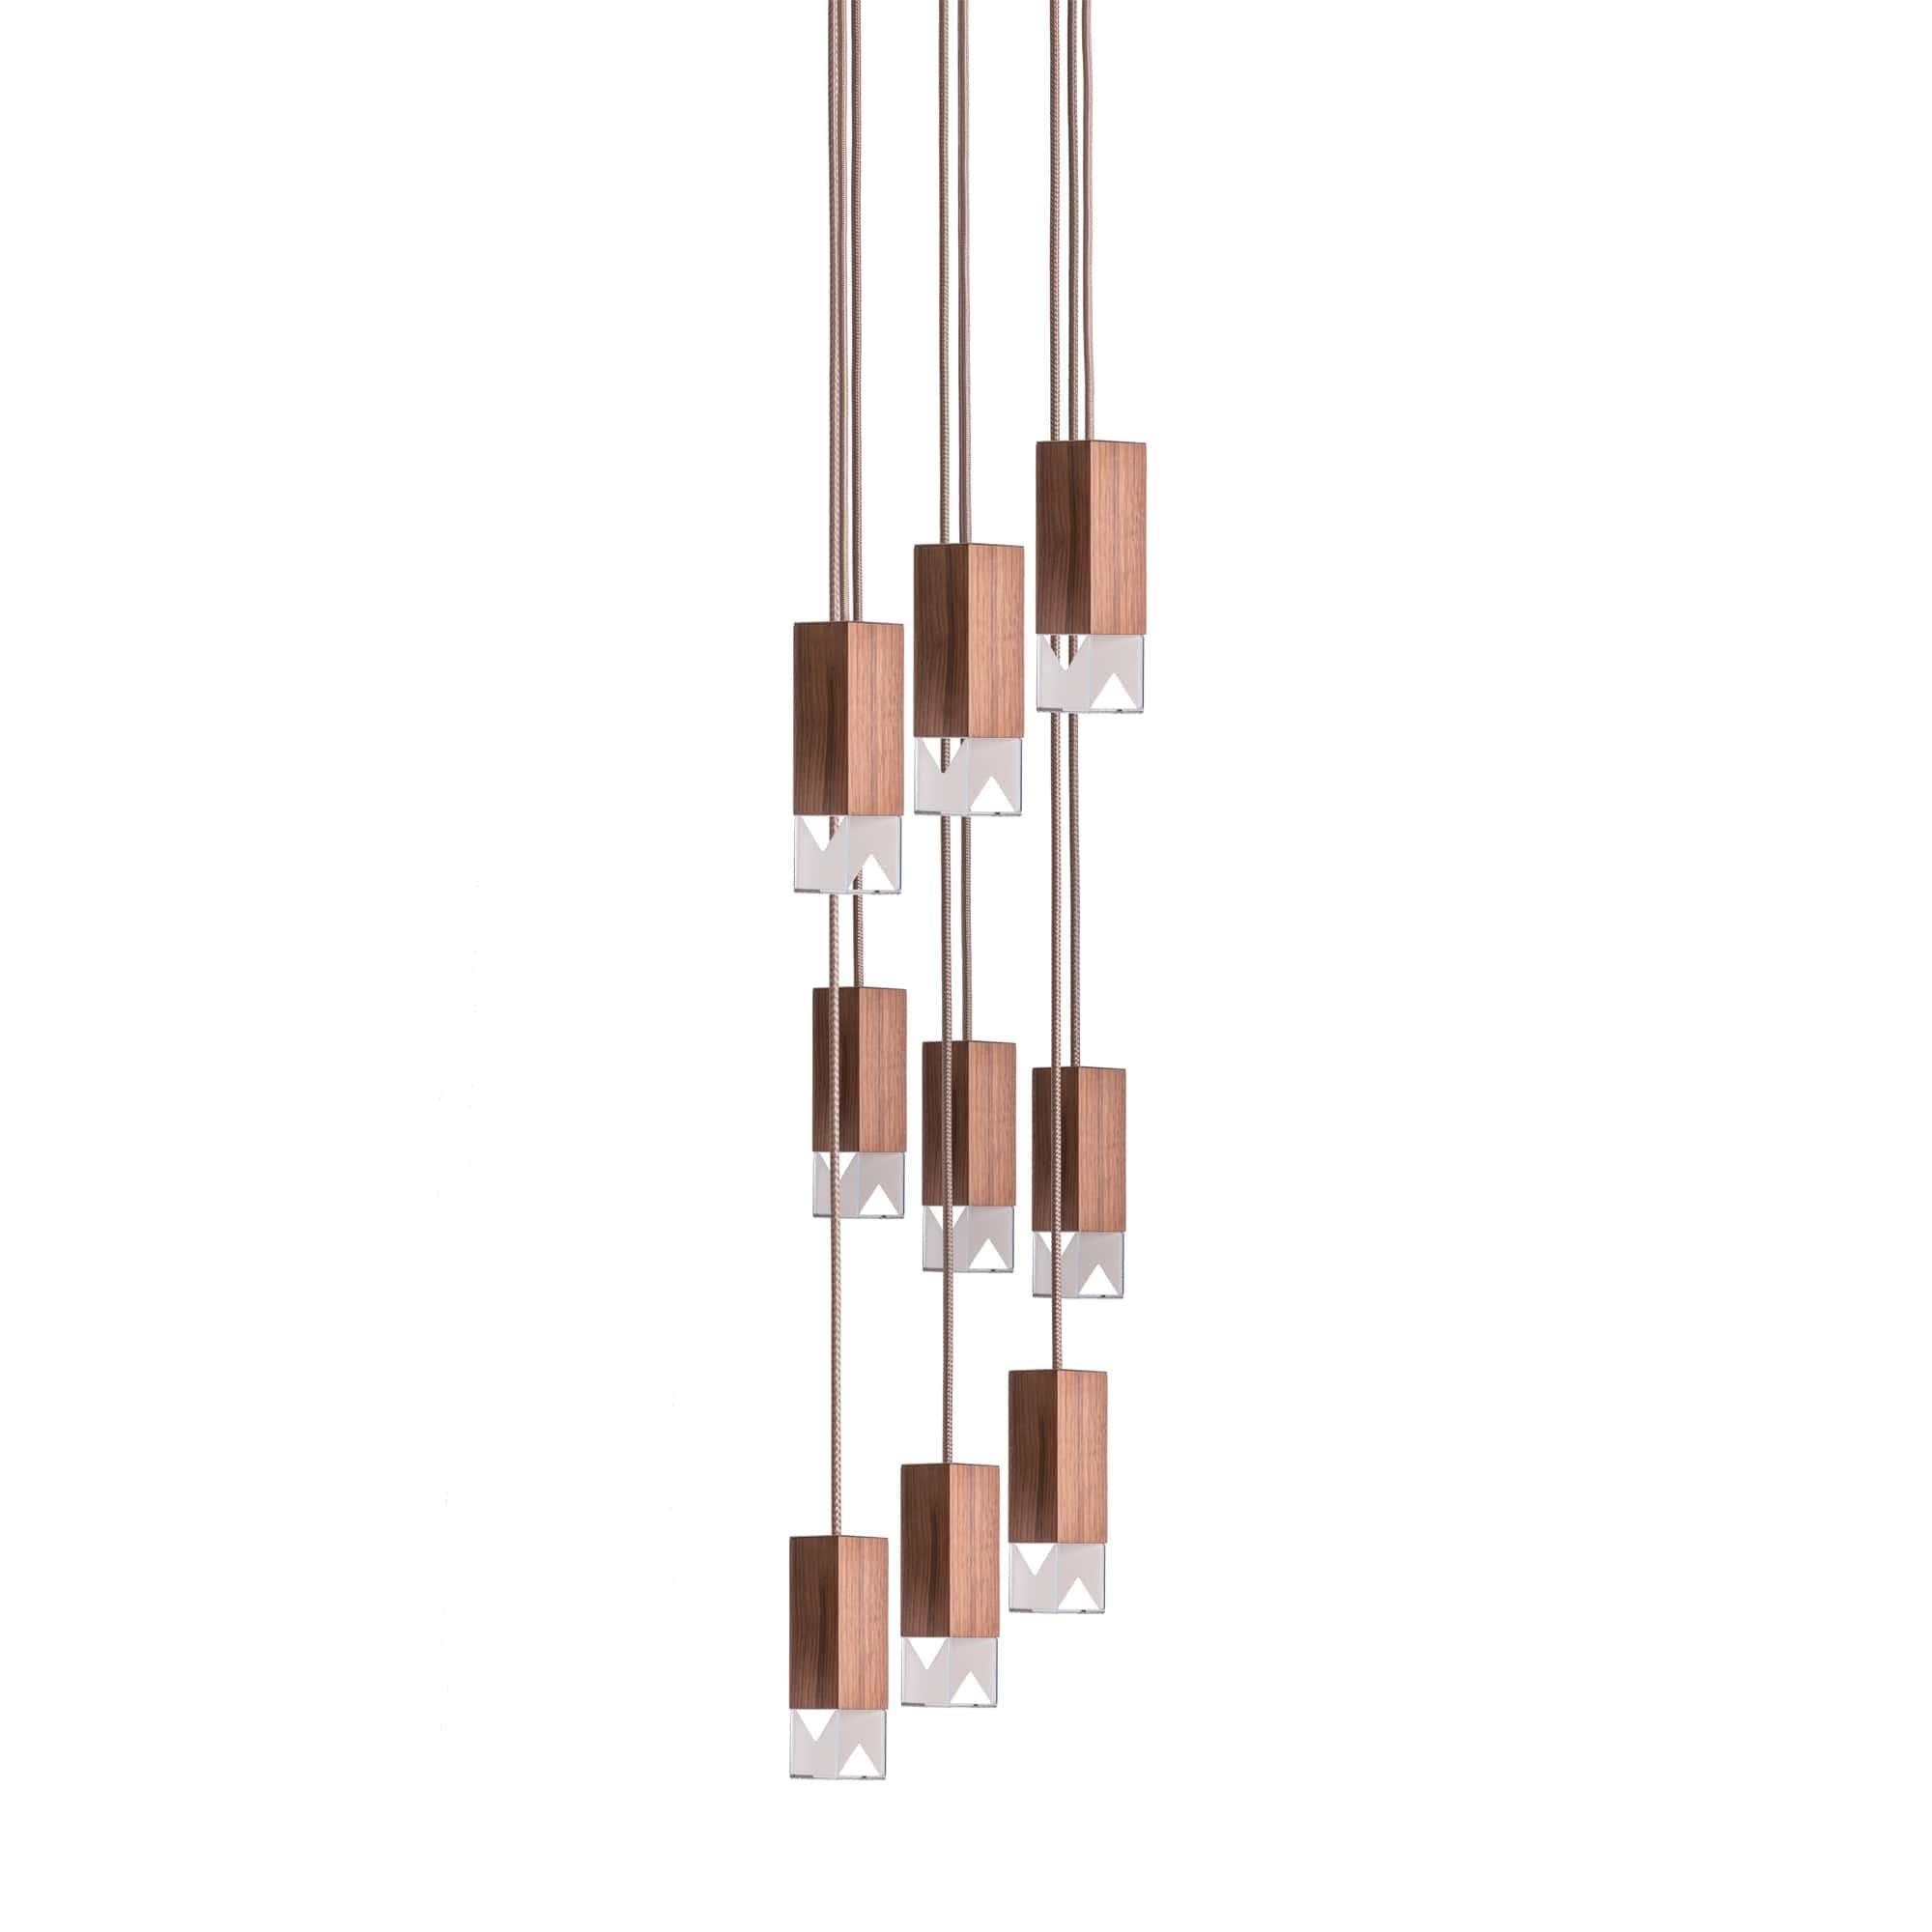 Lamp one 9-light chandelier in walnut by Formaminima
Dimensions: H 111.9 x 30 x 30 cm
Materials: Lamp body in walnut, oil finish

Ultra-thin anti-reflection crystal diffuser
Inside-diffuser Limoges biscuit-finish porcelain sheets
Satin brass